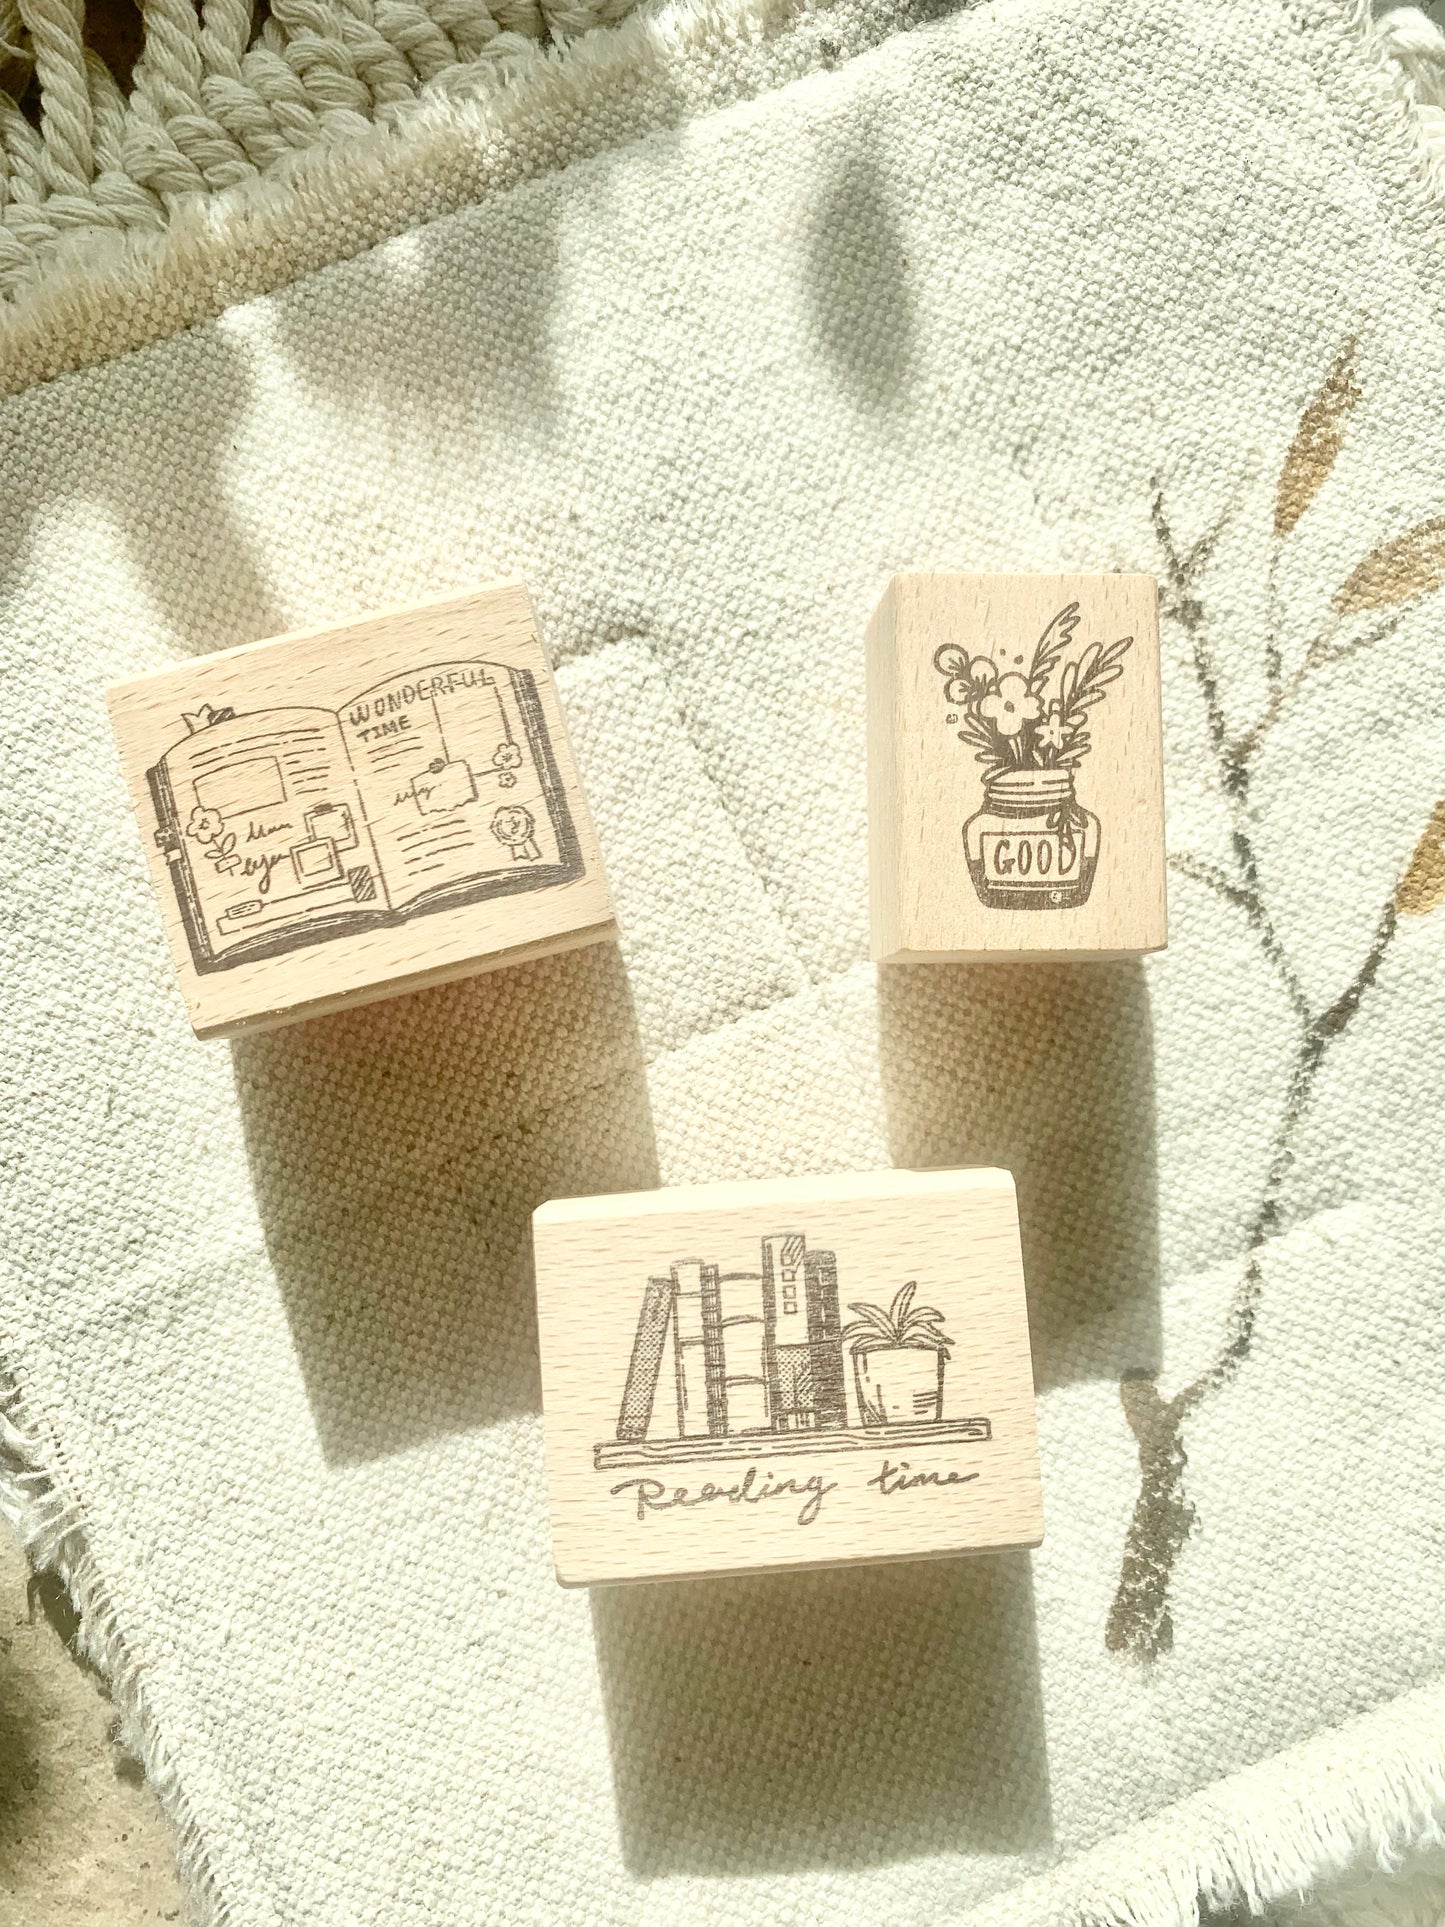 2 Pu Studio - Reading Time | Rubber Stamps